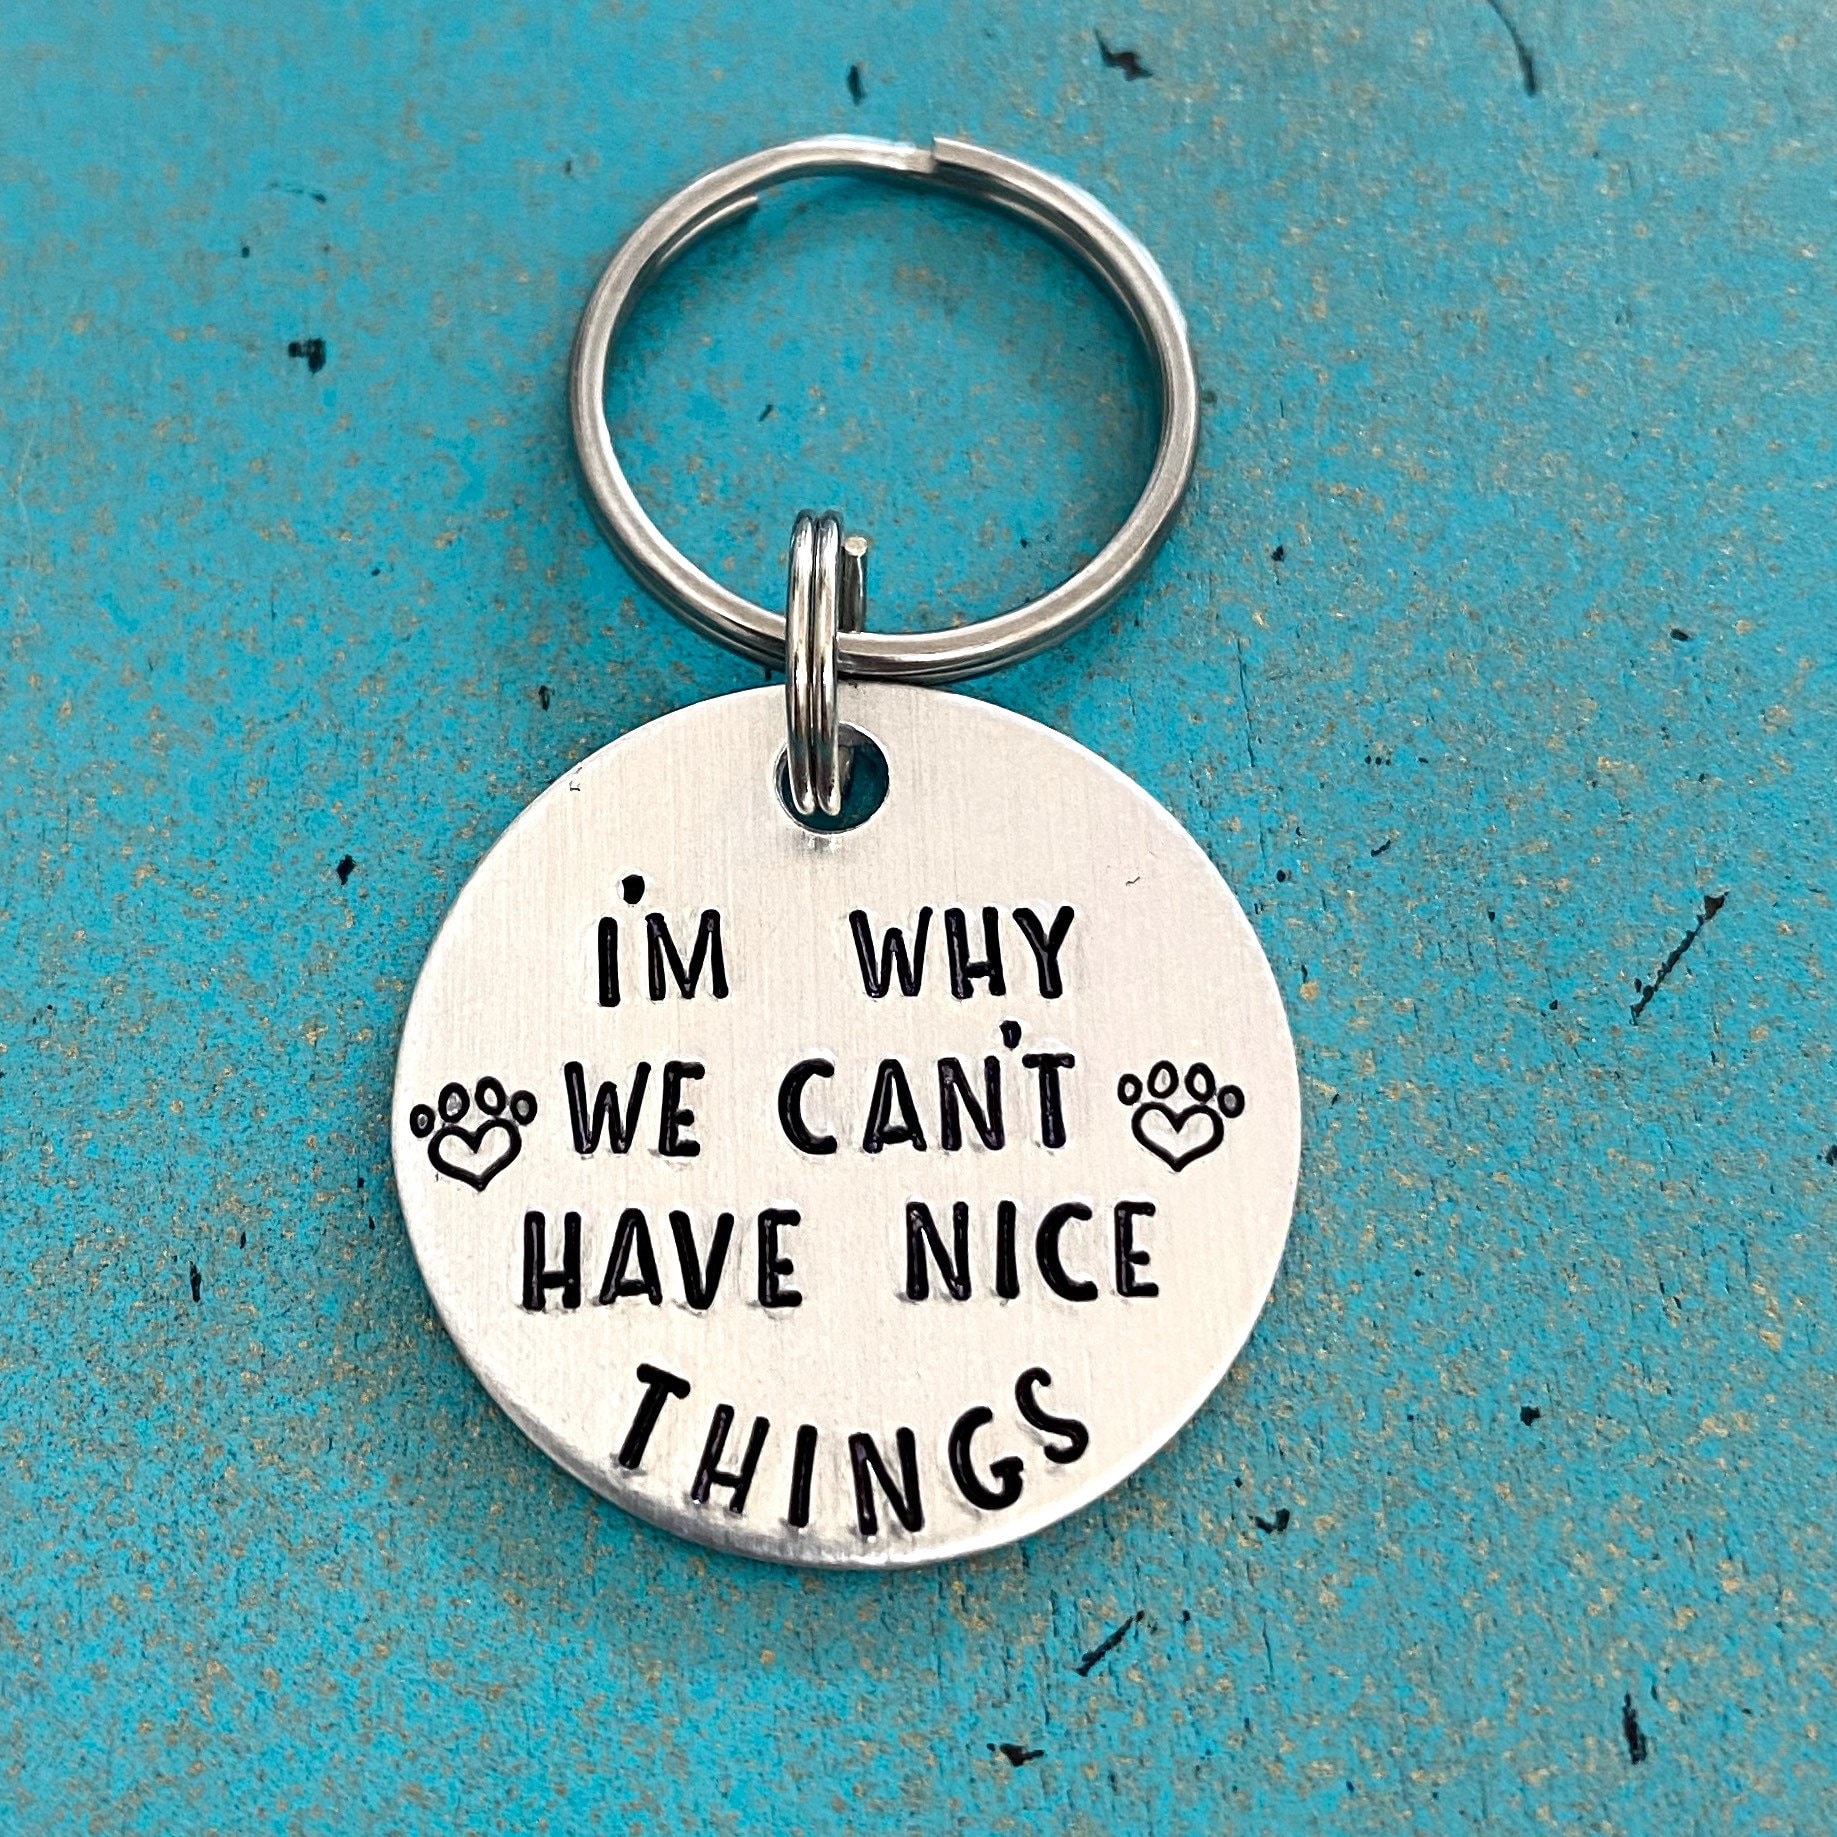 10 Funny Dog Tags for Your Furry Friend - Vetstreet